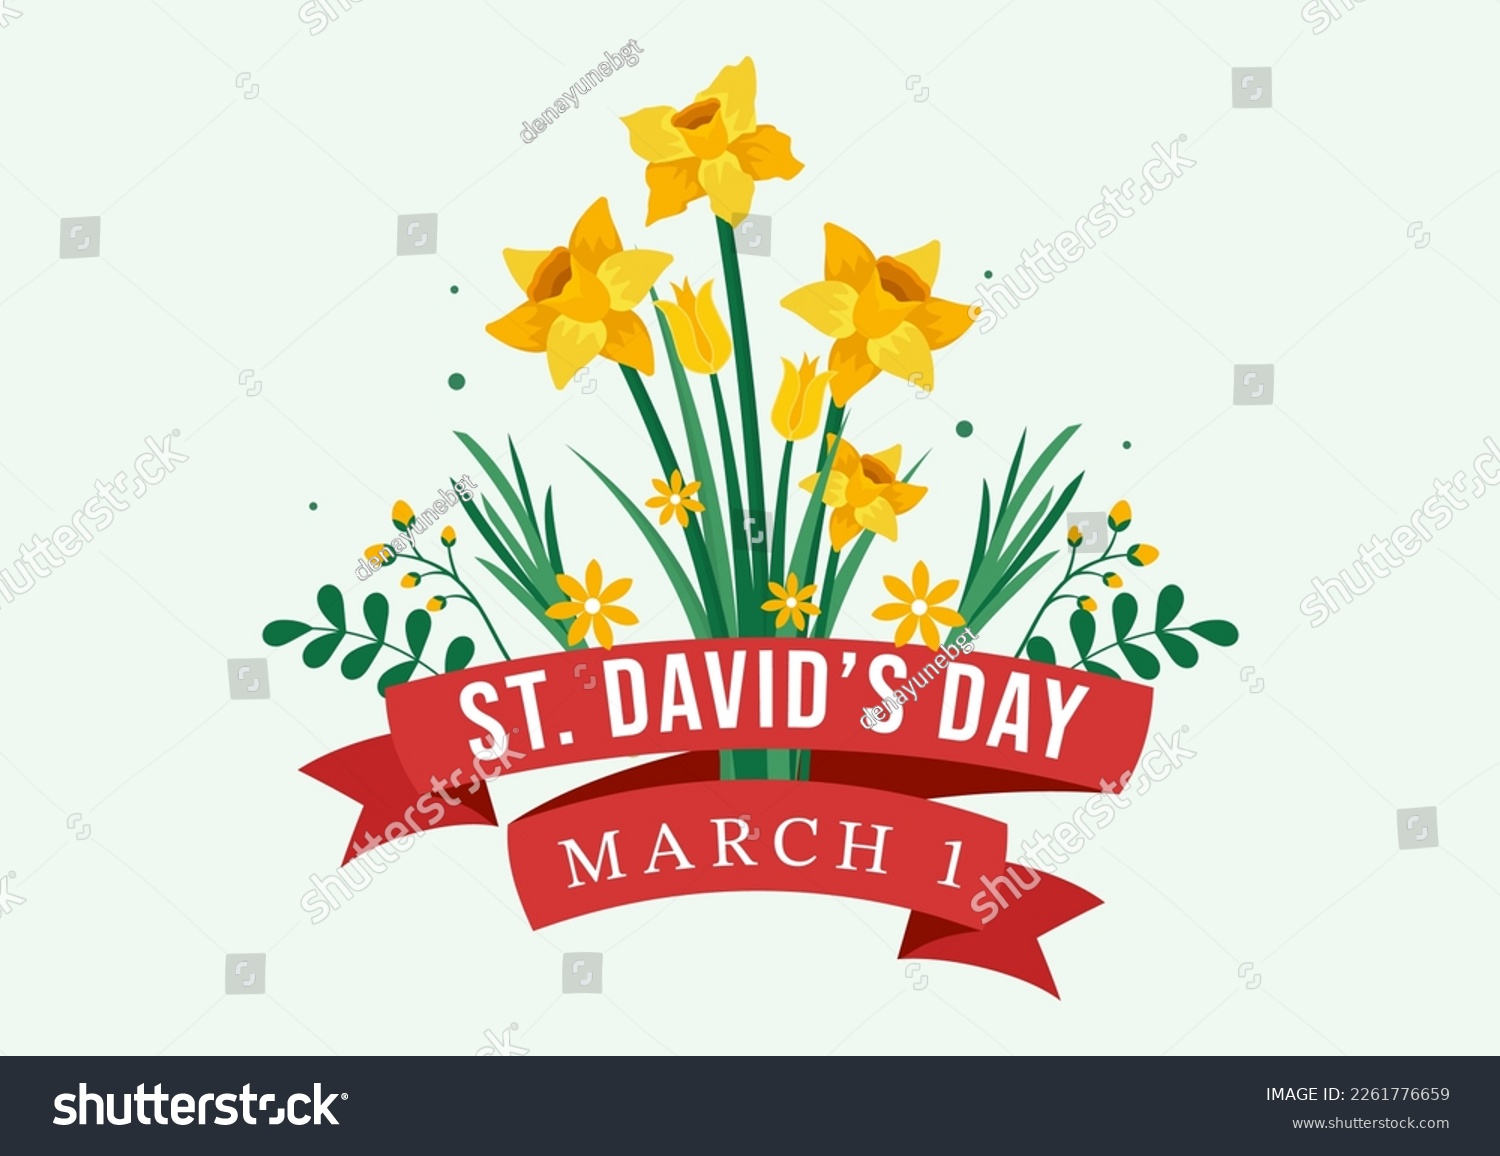 SVG of Happy St David's Day on March 1 Illustration with Welsh Dragons and Yellow Daffodils for Landing Page in Flat Cartoon Hand Drawn Templates svg